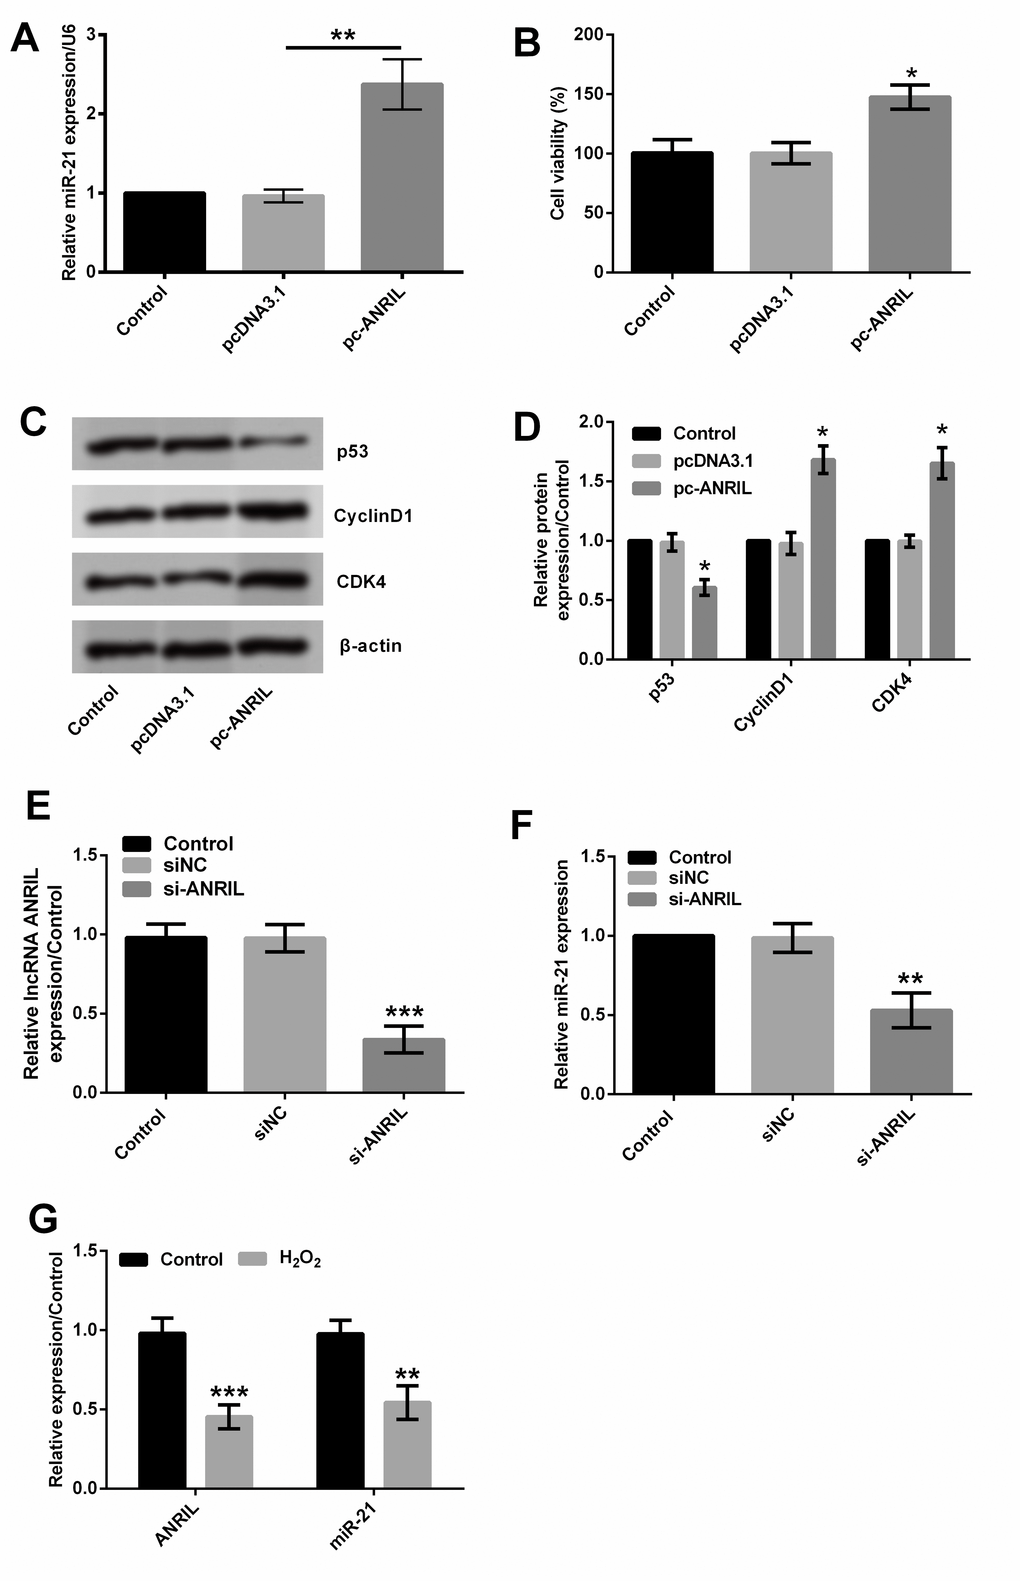 LncRNA ANRIL could up-regulate miR-21 expression in HLECs. HLEC SRA01/04 cells were transfected with pcDNA3.1 or pc-ANRIL, and untransfected cells were acted as control. (A) and (E–G) expression of lncRNA ANRIL and miR-21 were determined by RT-qPCR. (B) Cell viability was measured by CCK-8 assay. Data are shown as the mean ± SD of three independent experiments. *, P P P 